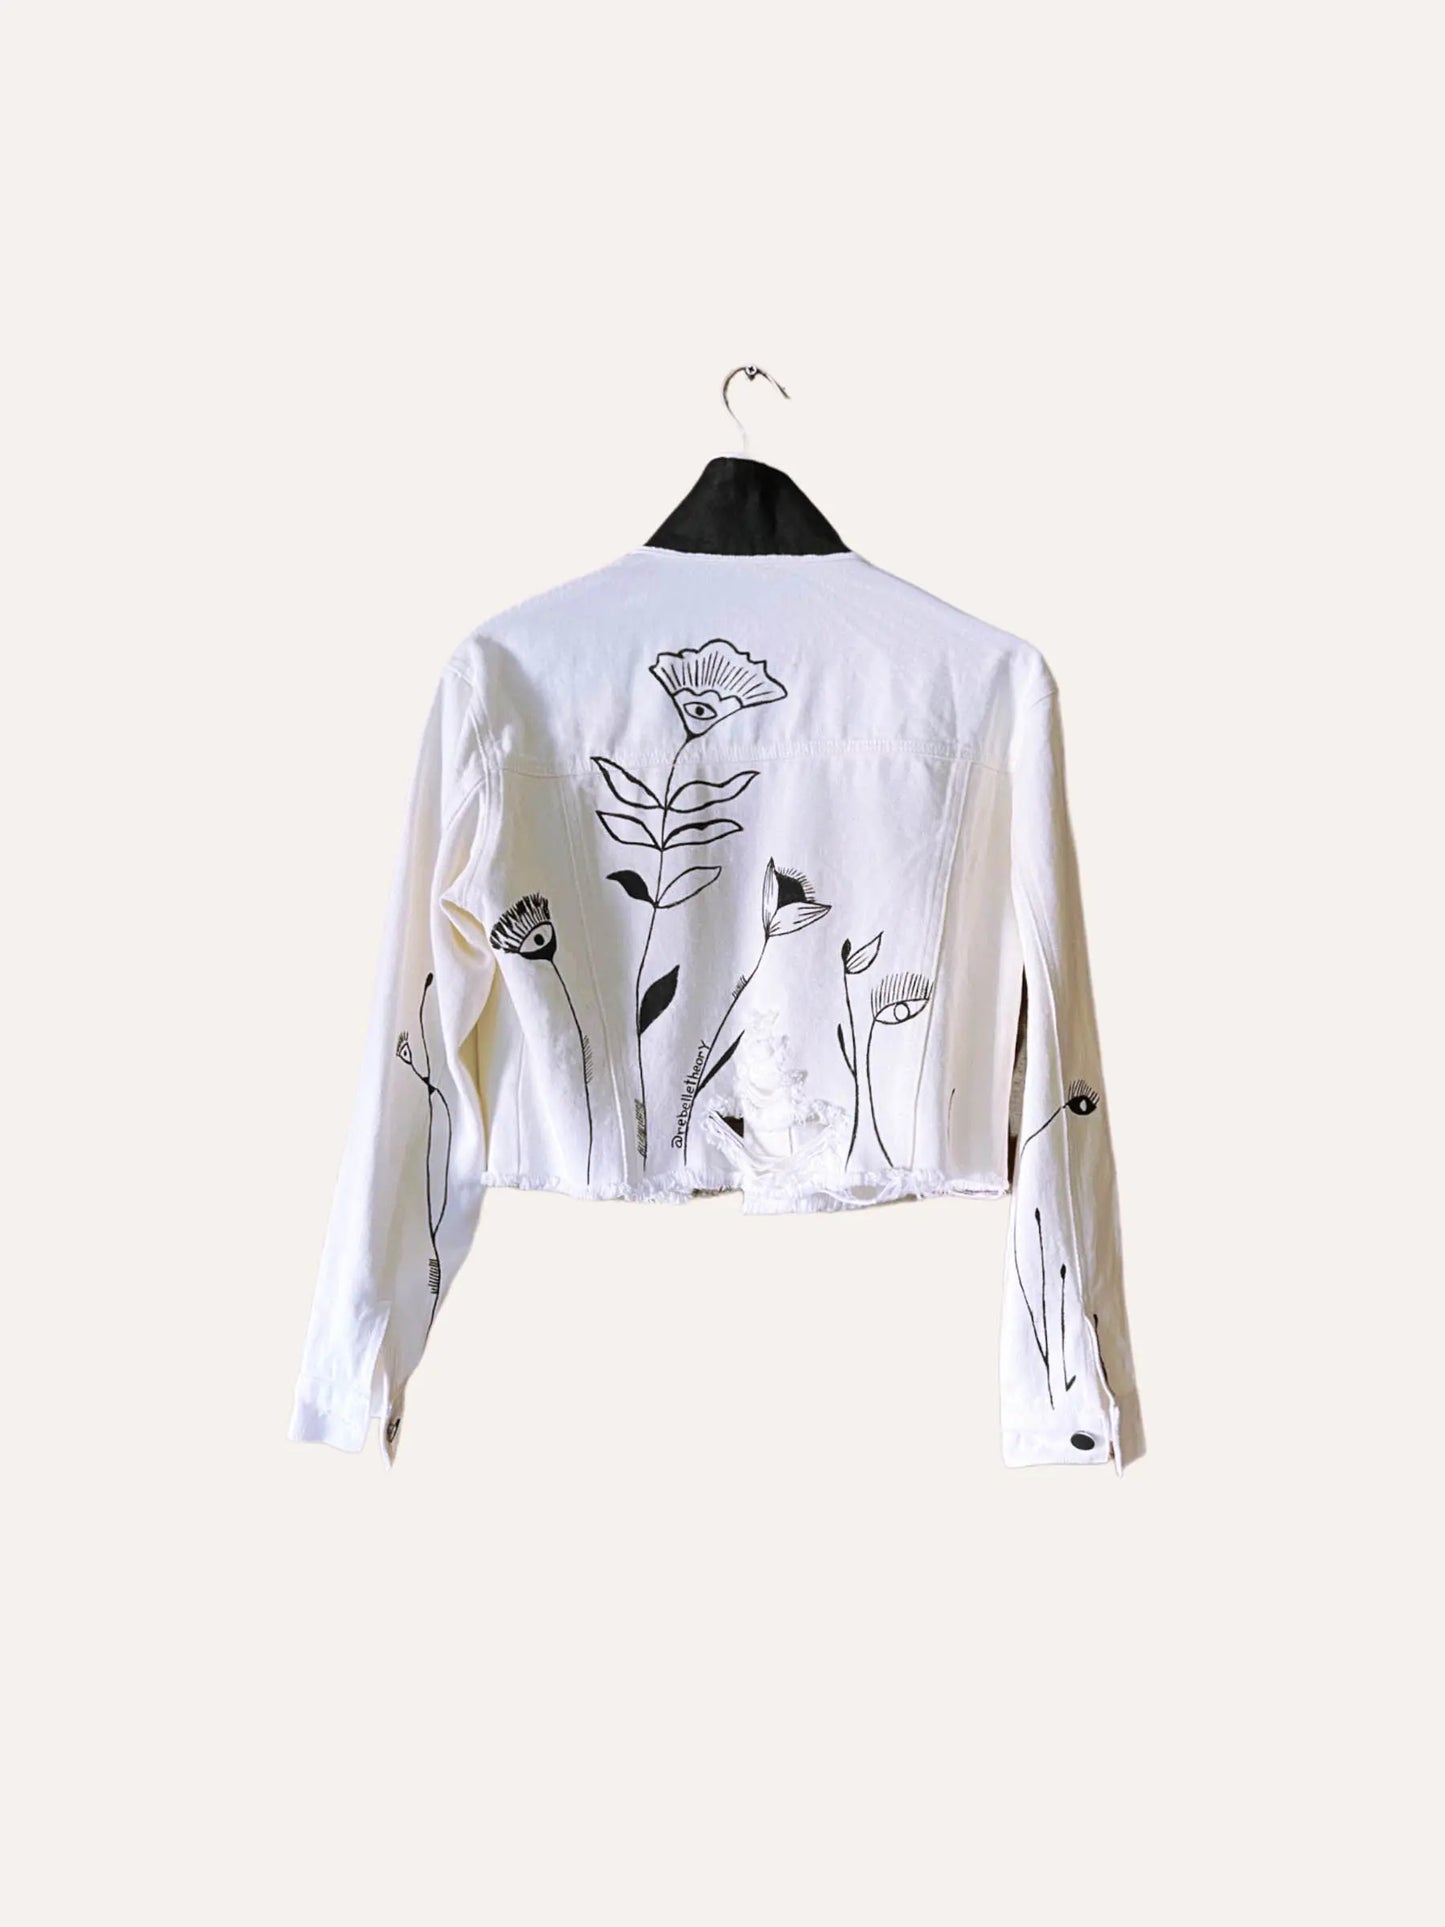 FLOWER POWER Hand Painted Jacket - Rebelle Theory